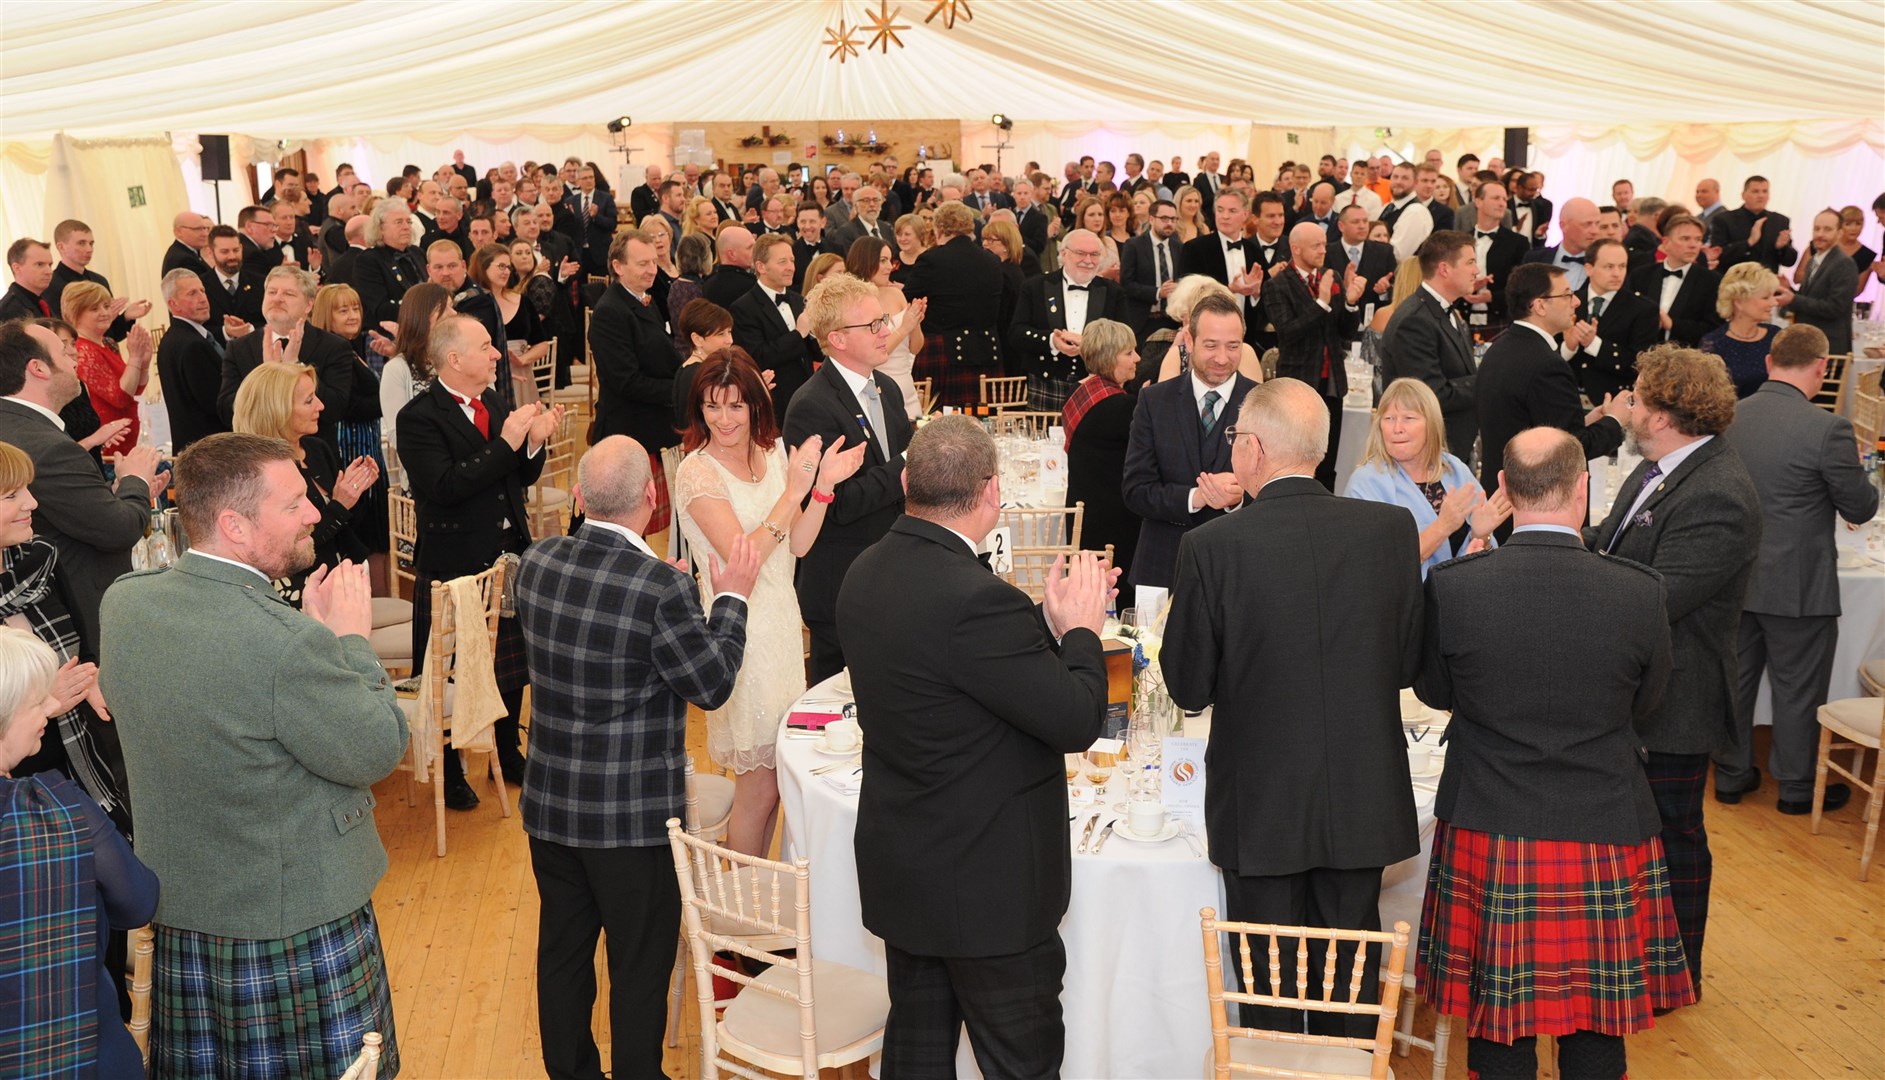 The Spirit of Speyside Whisky Festival attracts thousands to Moray each year.